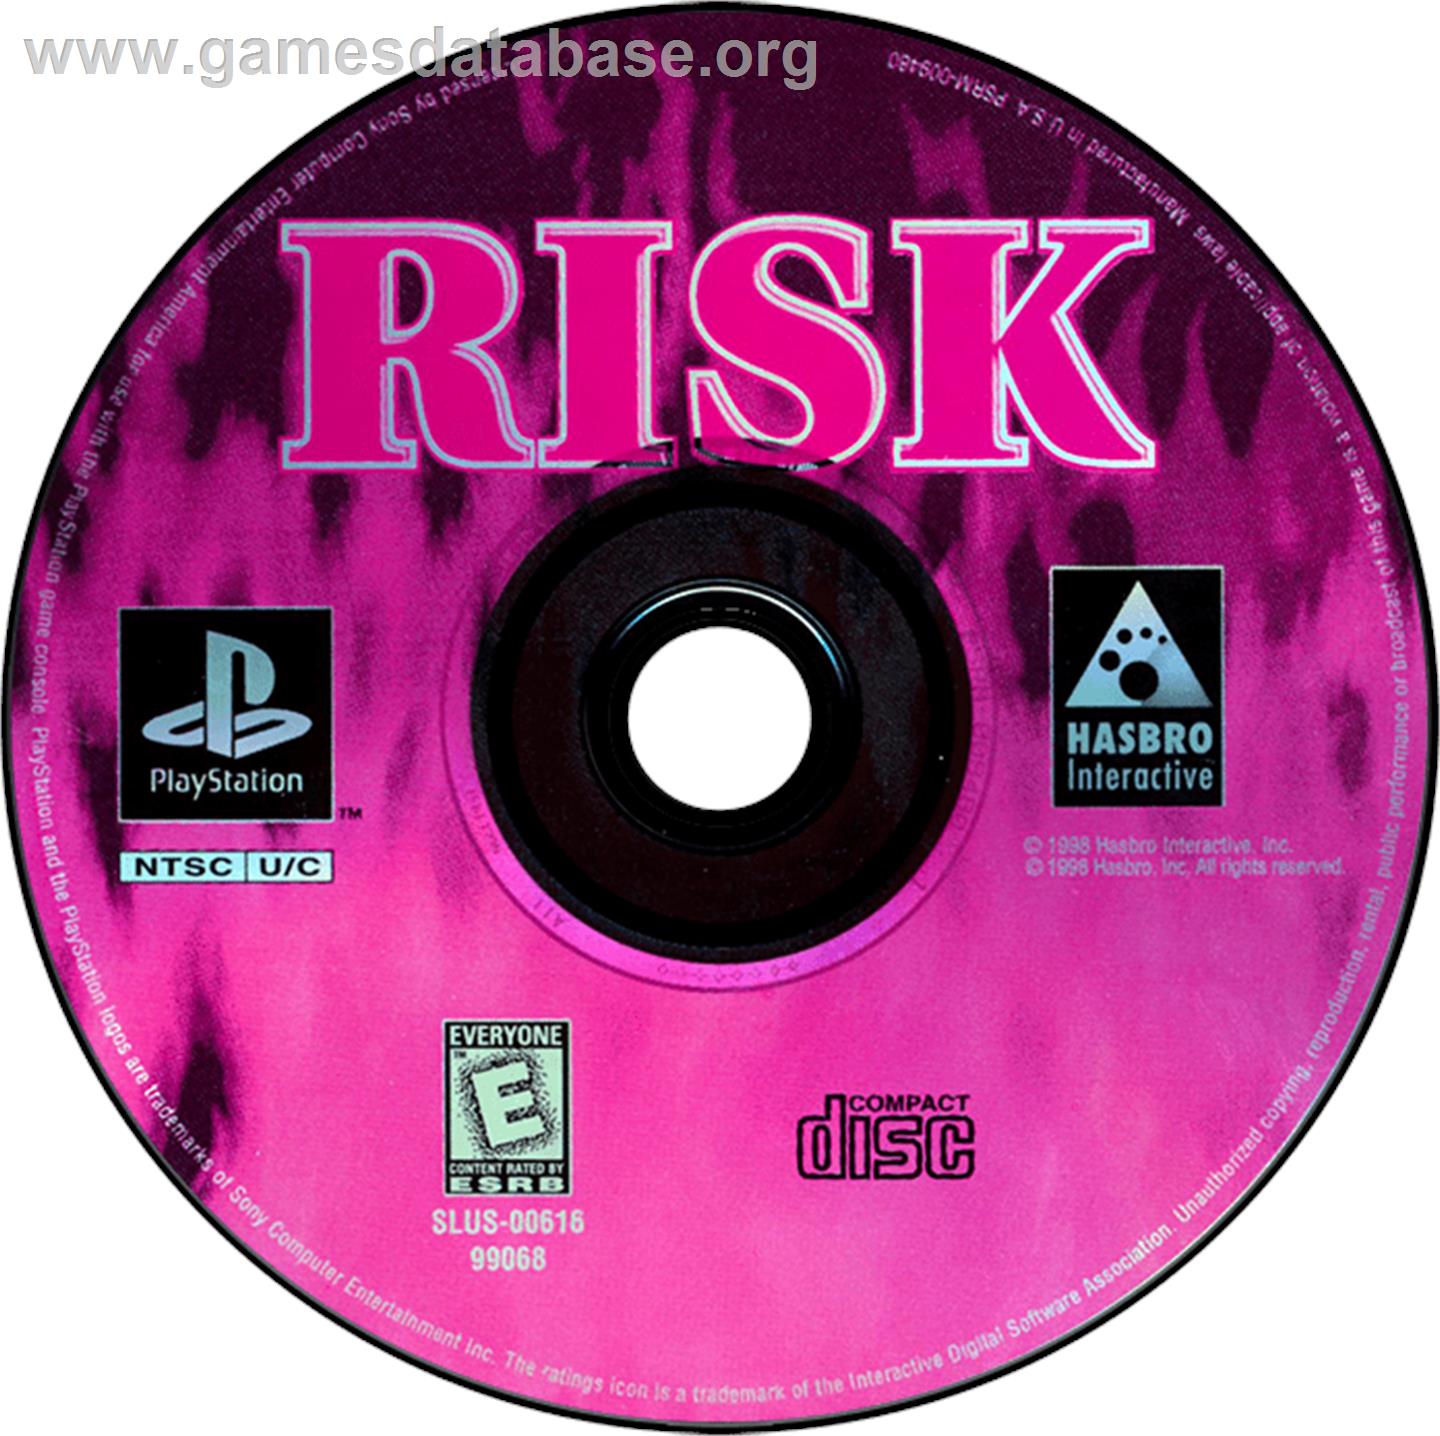 RISK: The Game of Global Domination - Sony Playstation - Artwork - Disc